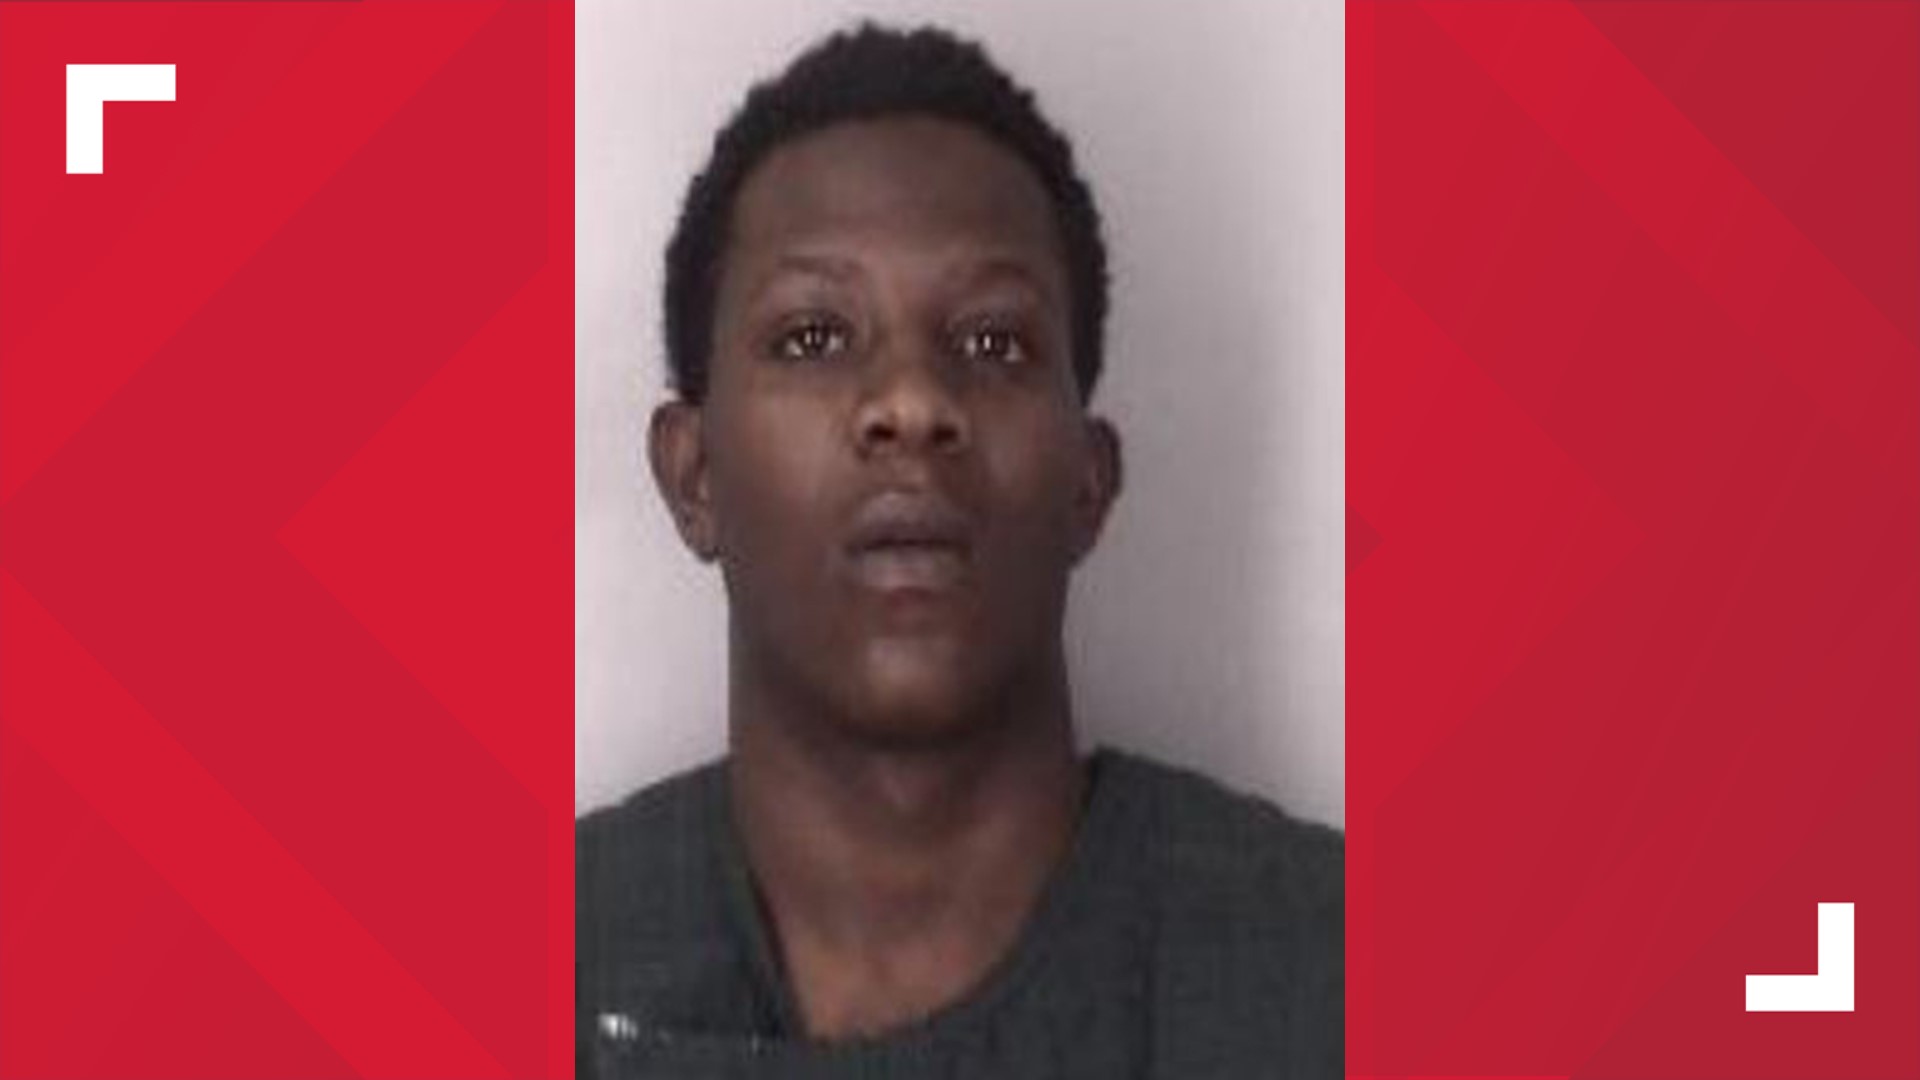 Investigators want to question 19-year-old Xavier S. Elliott about a shooting that happened at the intersection of Connor Place and Aylwin Road on July 1.